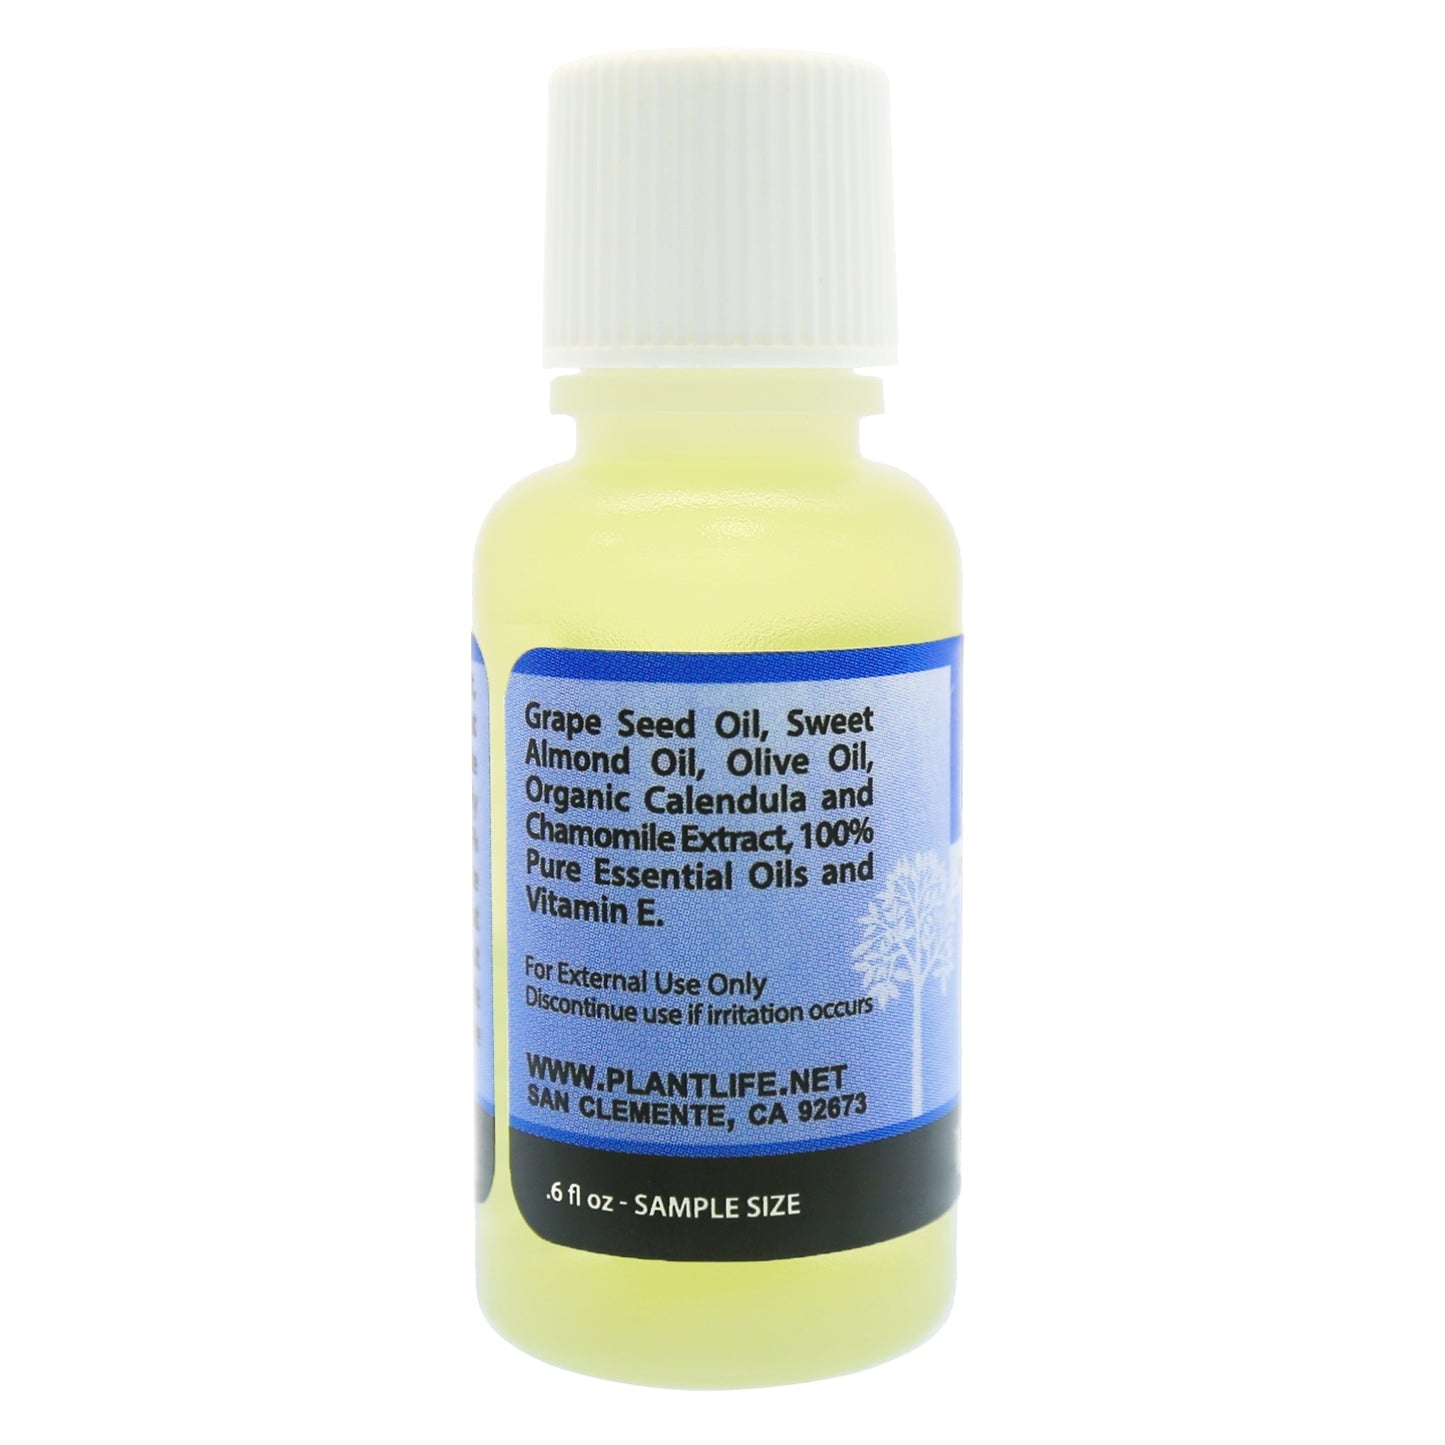 Stress Relief Travel Size Massage Oil